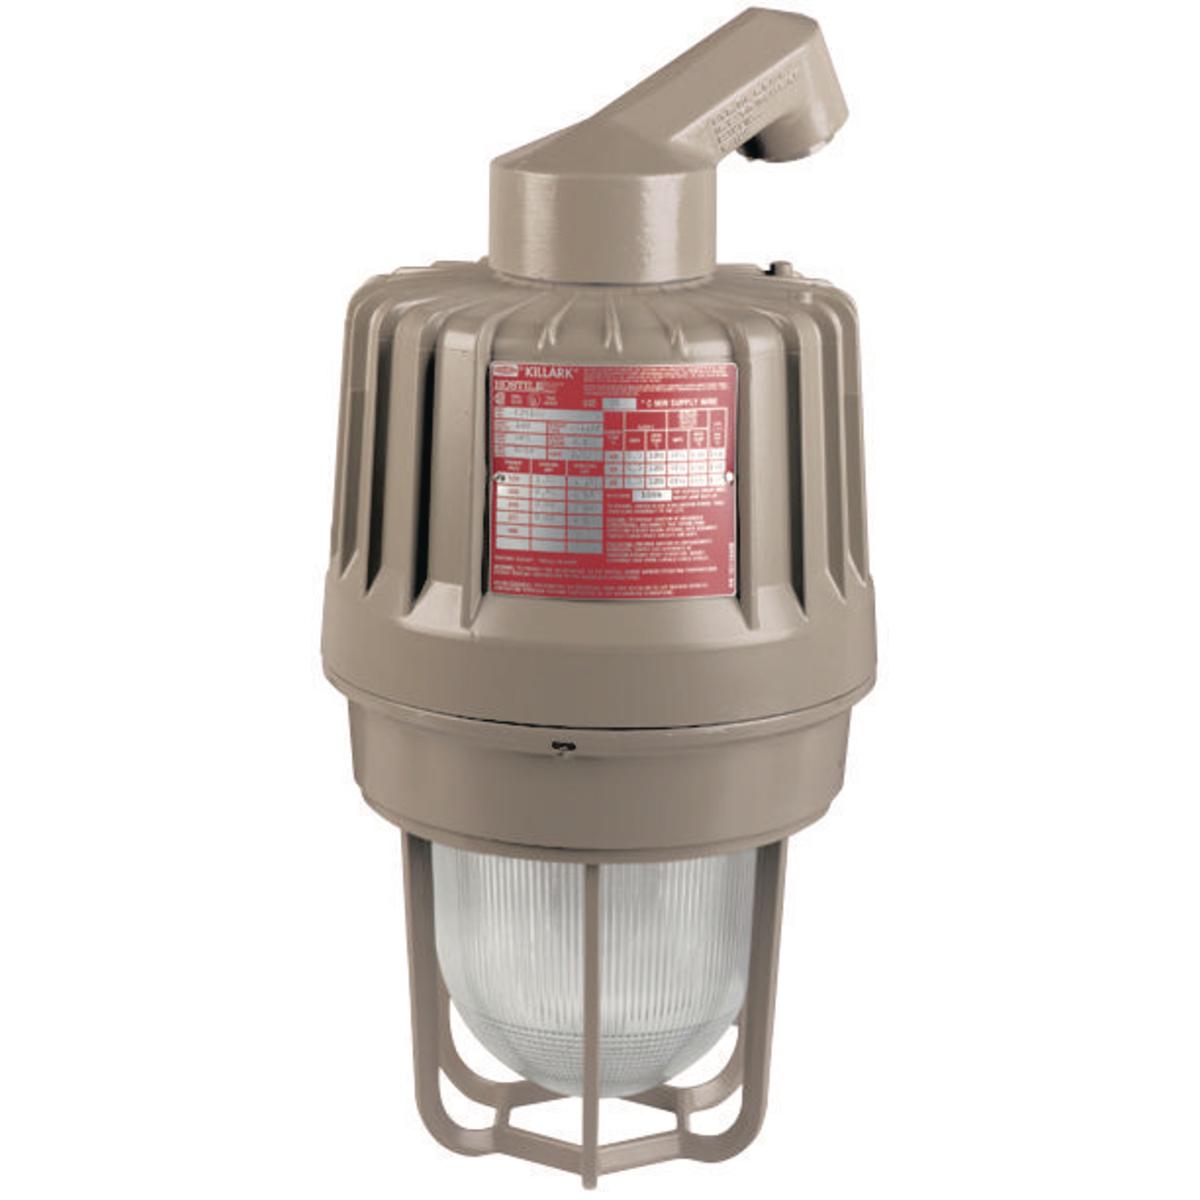 Hubbell EZS400D5 HID 400W Quadri-Volt High Pressure Sodium 1-1/2" Stanchion Mount  ; Three light sources – High Pressure Sodium (50-400W), Metal Halide (70-400W) and Pulse Start Metal Halide (175-400W) ; Mounting choice –Pendant, ceiling, 25˚ stanchion or 90˚ wall mount, 